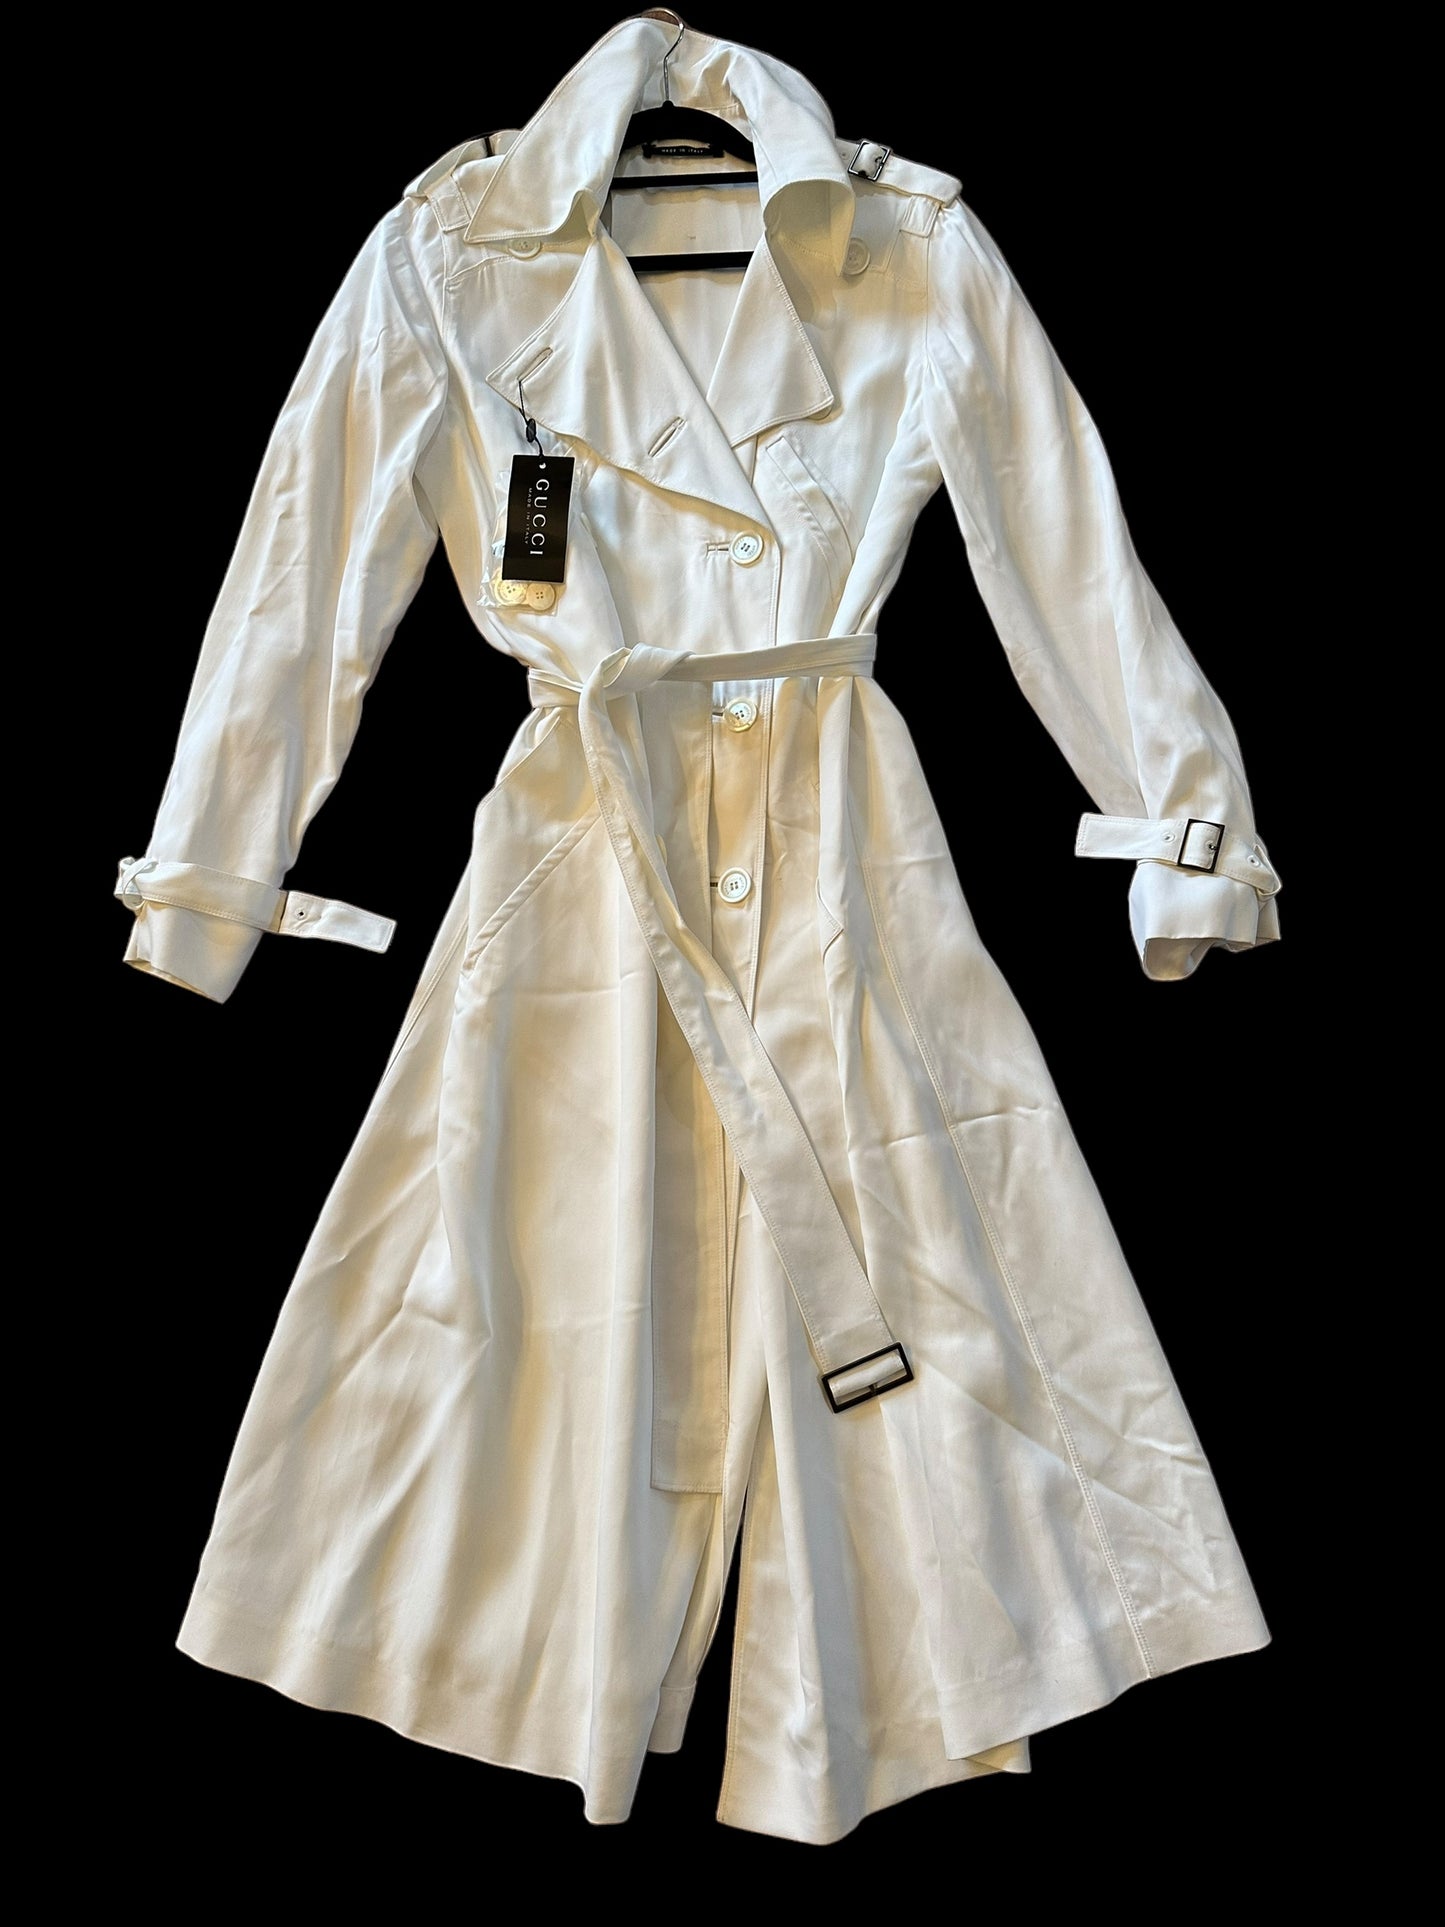 Gucci by Tom Ford White Trench Coat NWT 2002/2003 Size IT44